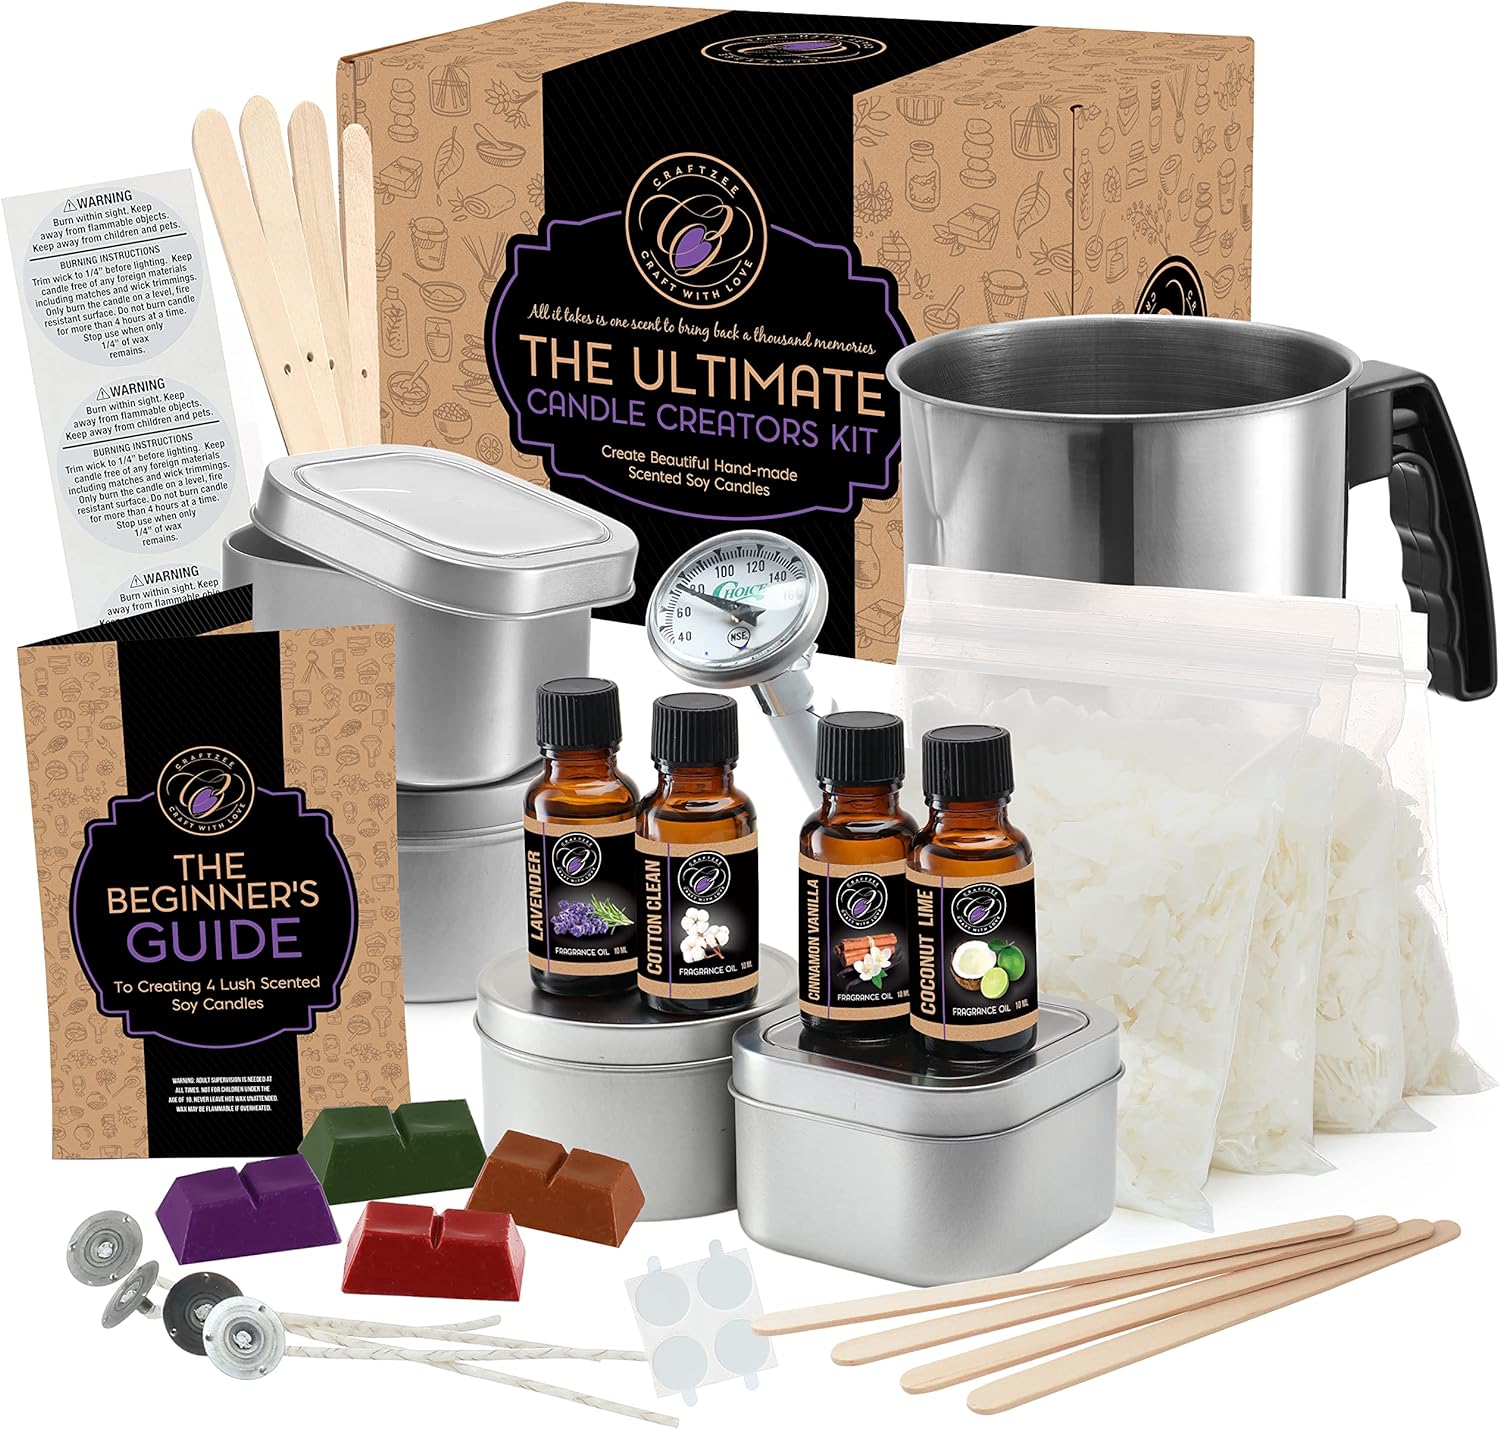 Complete DIY Candle Making Kit Supplies Full Beginners Soy Candle Making Kit  Including Soybean Wax, Dyes, Wicks, Pot, Tins & More 